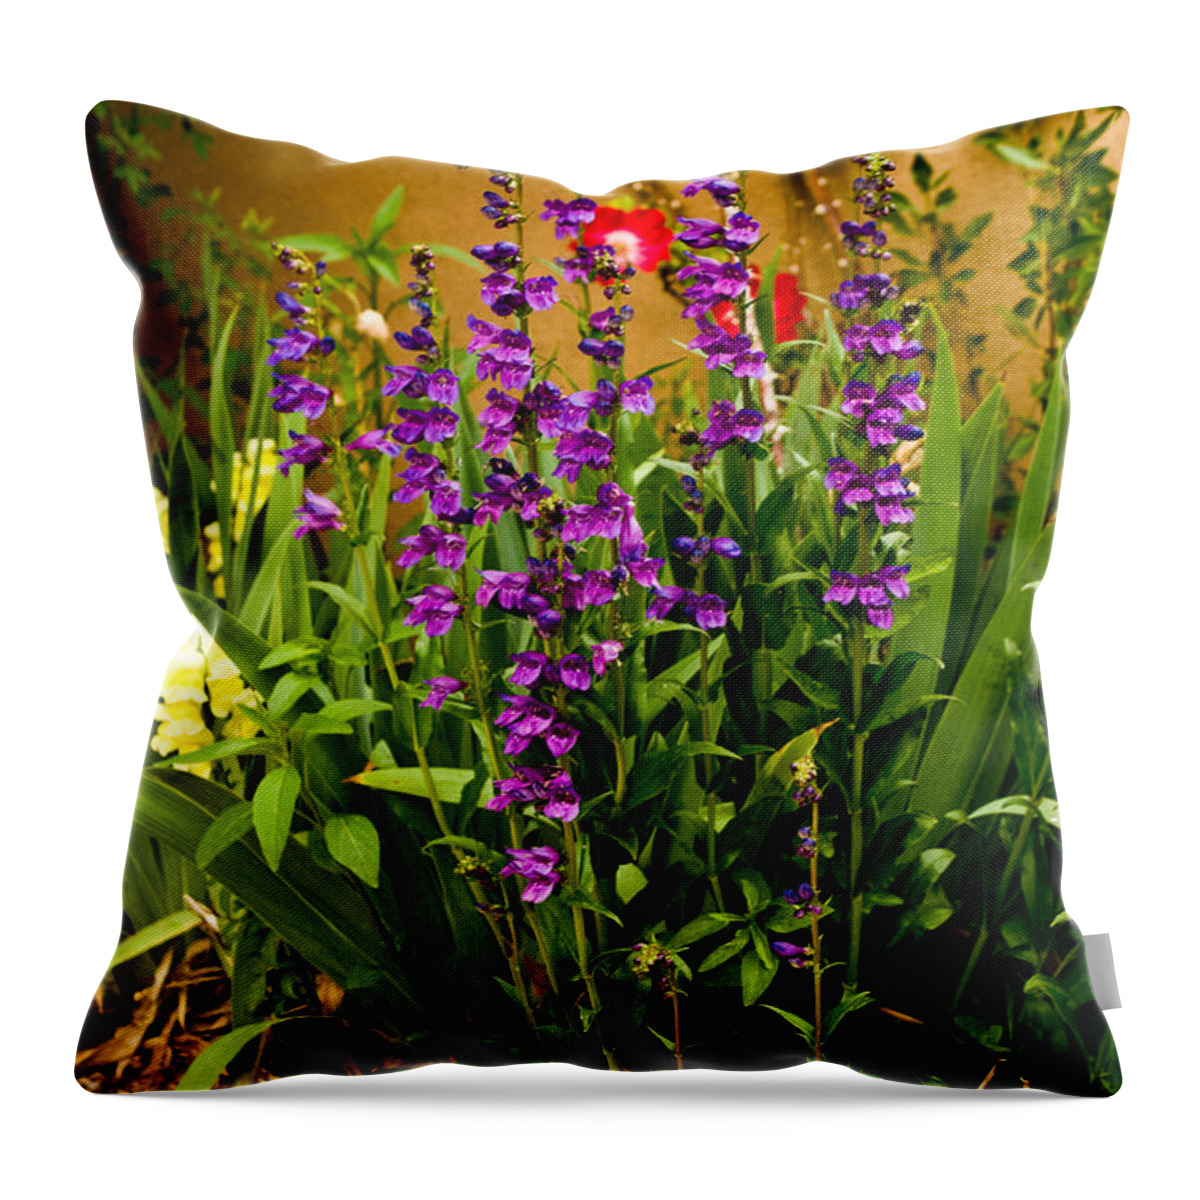  Throw Pillow featuring the photograph Summer Floral Garden by James Gay